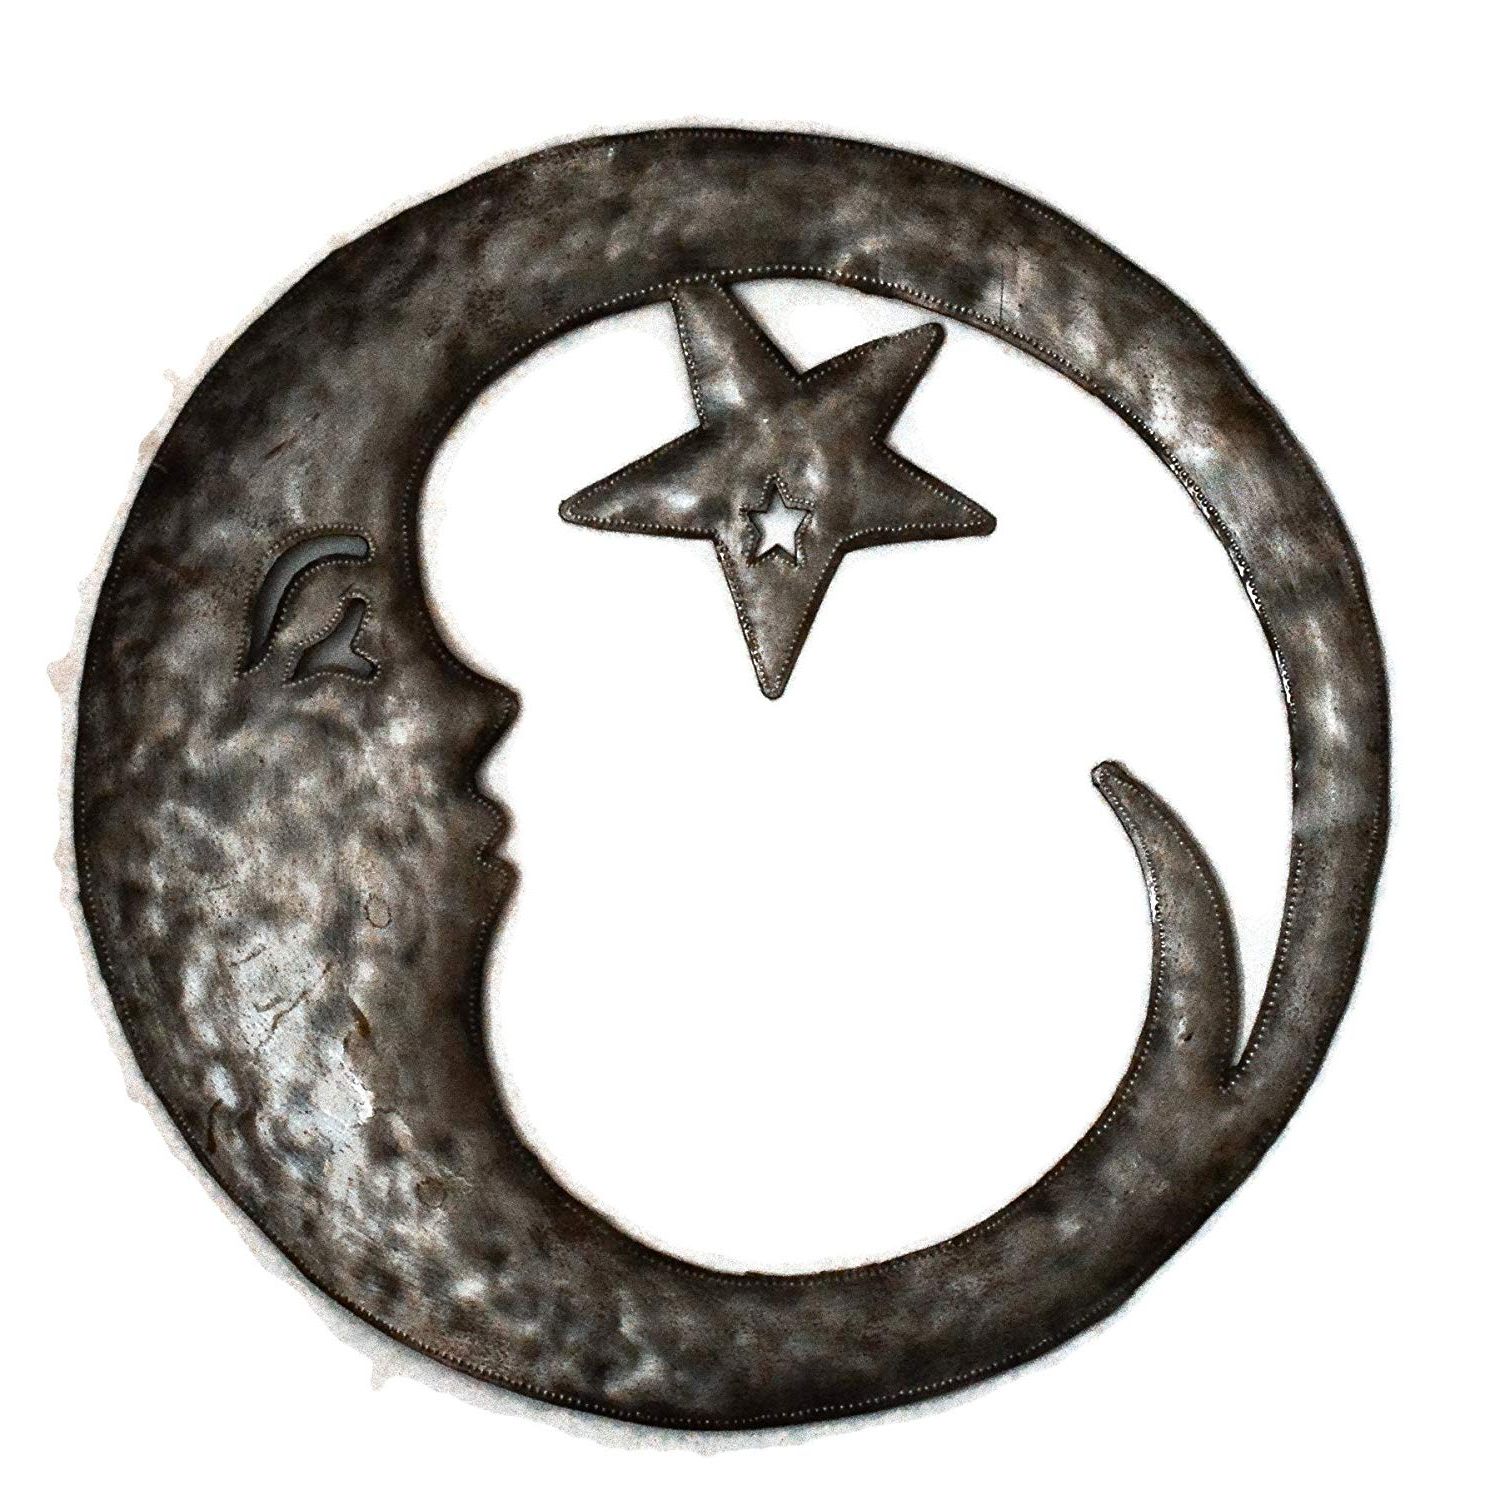 Amazon: Crescent Moon Wall Sculpture, Outdoor Home Decor Throughout Famous Recycled Moon And Sun Wall Decor (View 12 of 20)